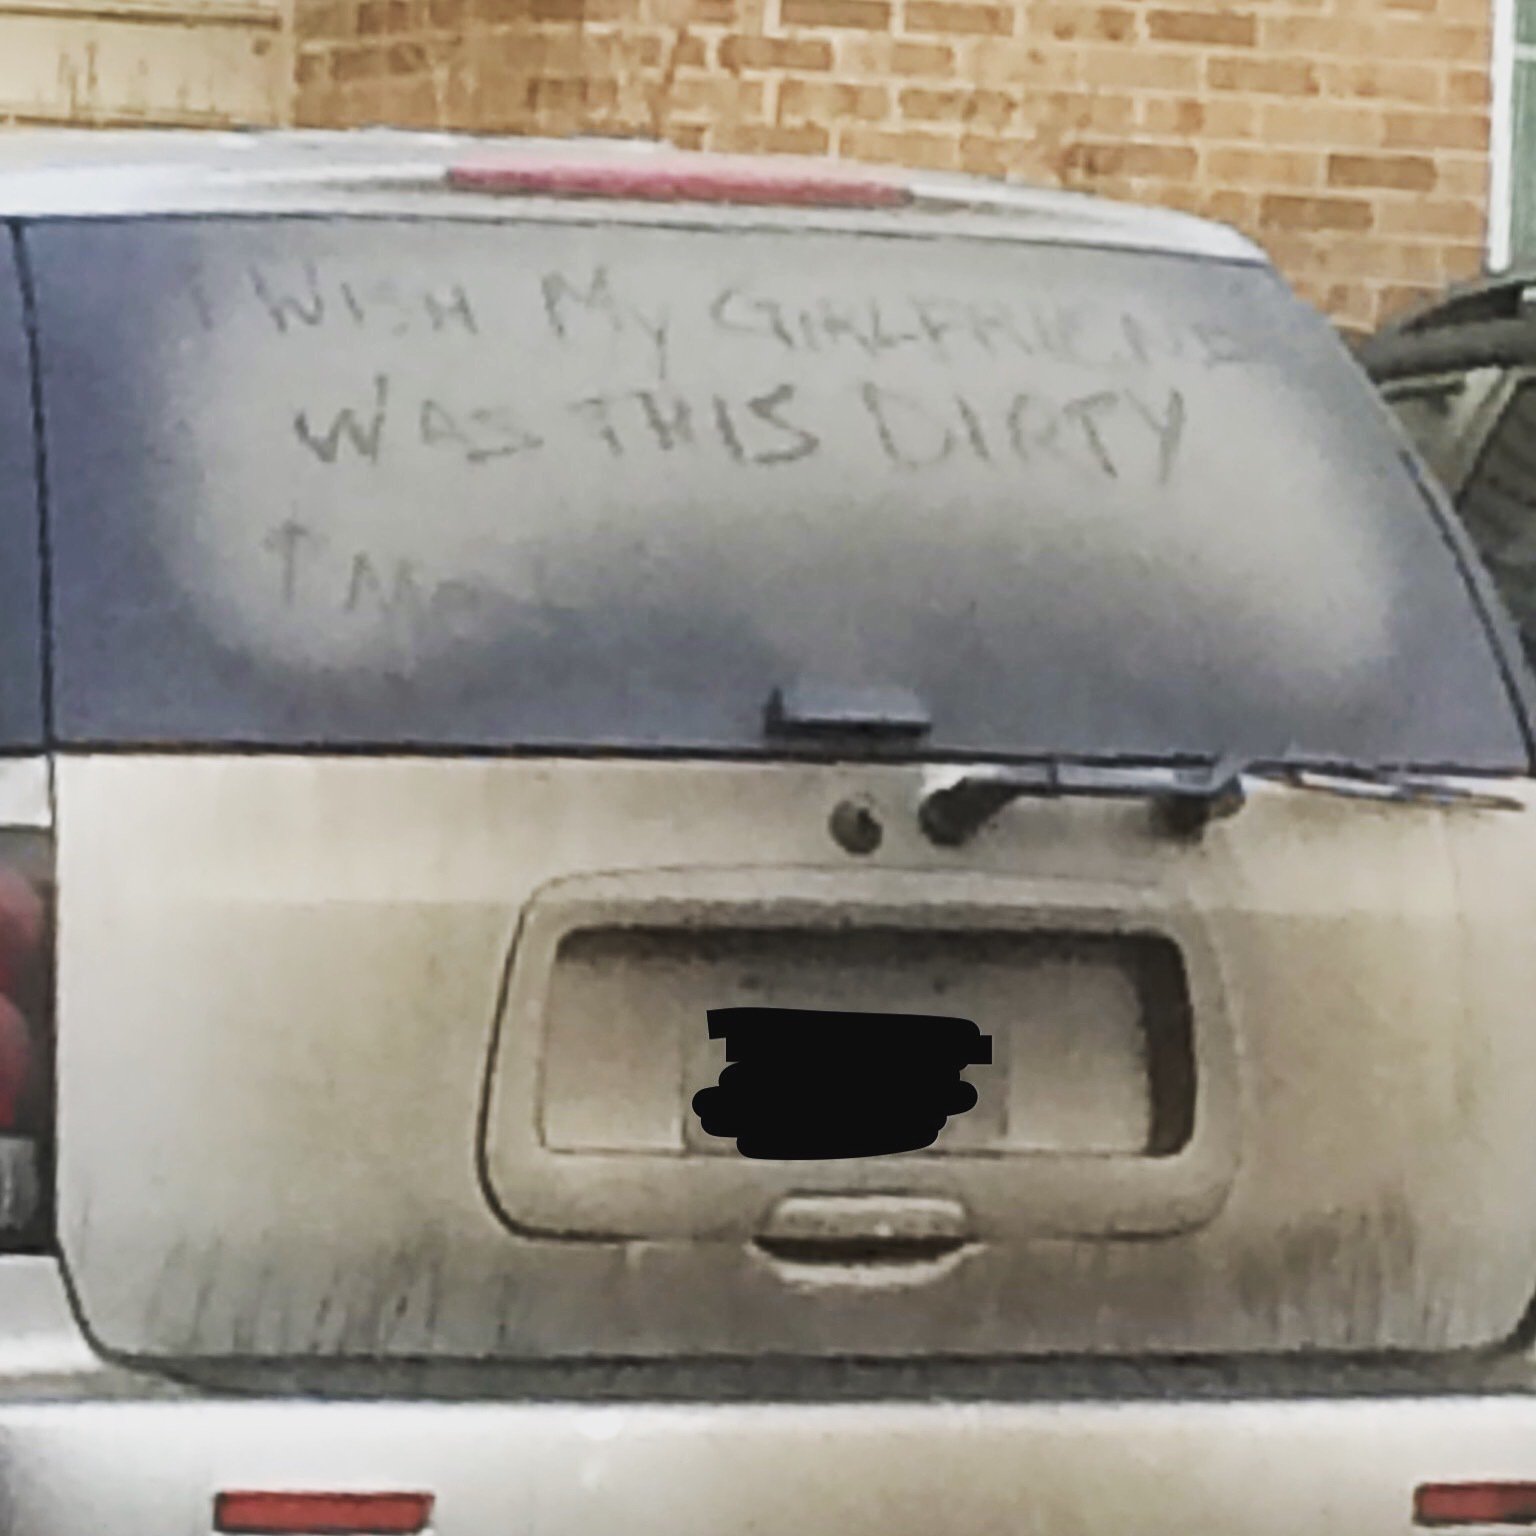 "I wish my girlfriend was this dirty"